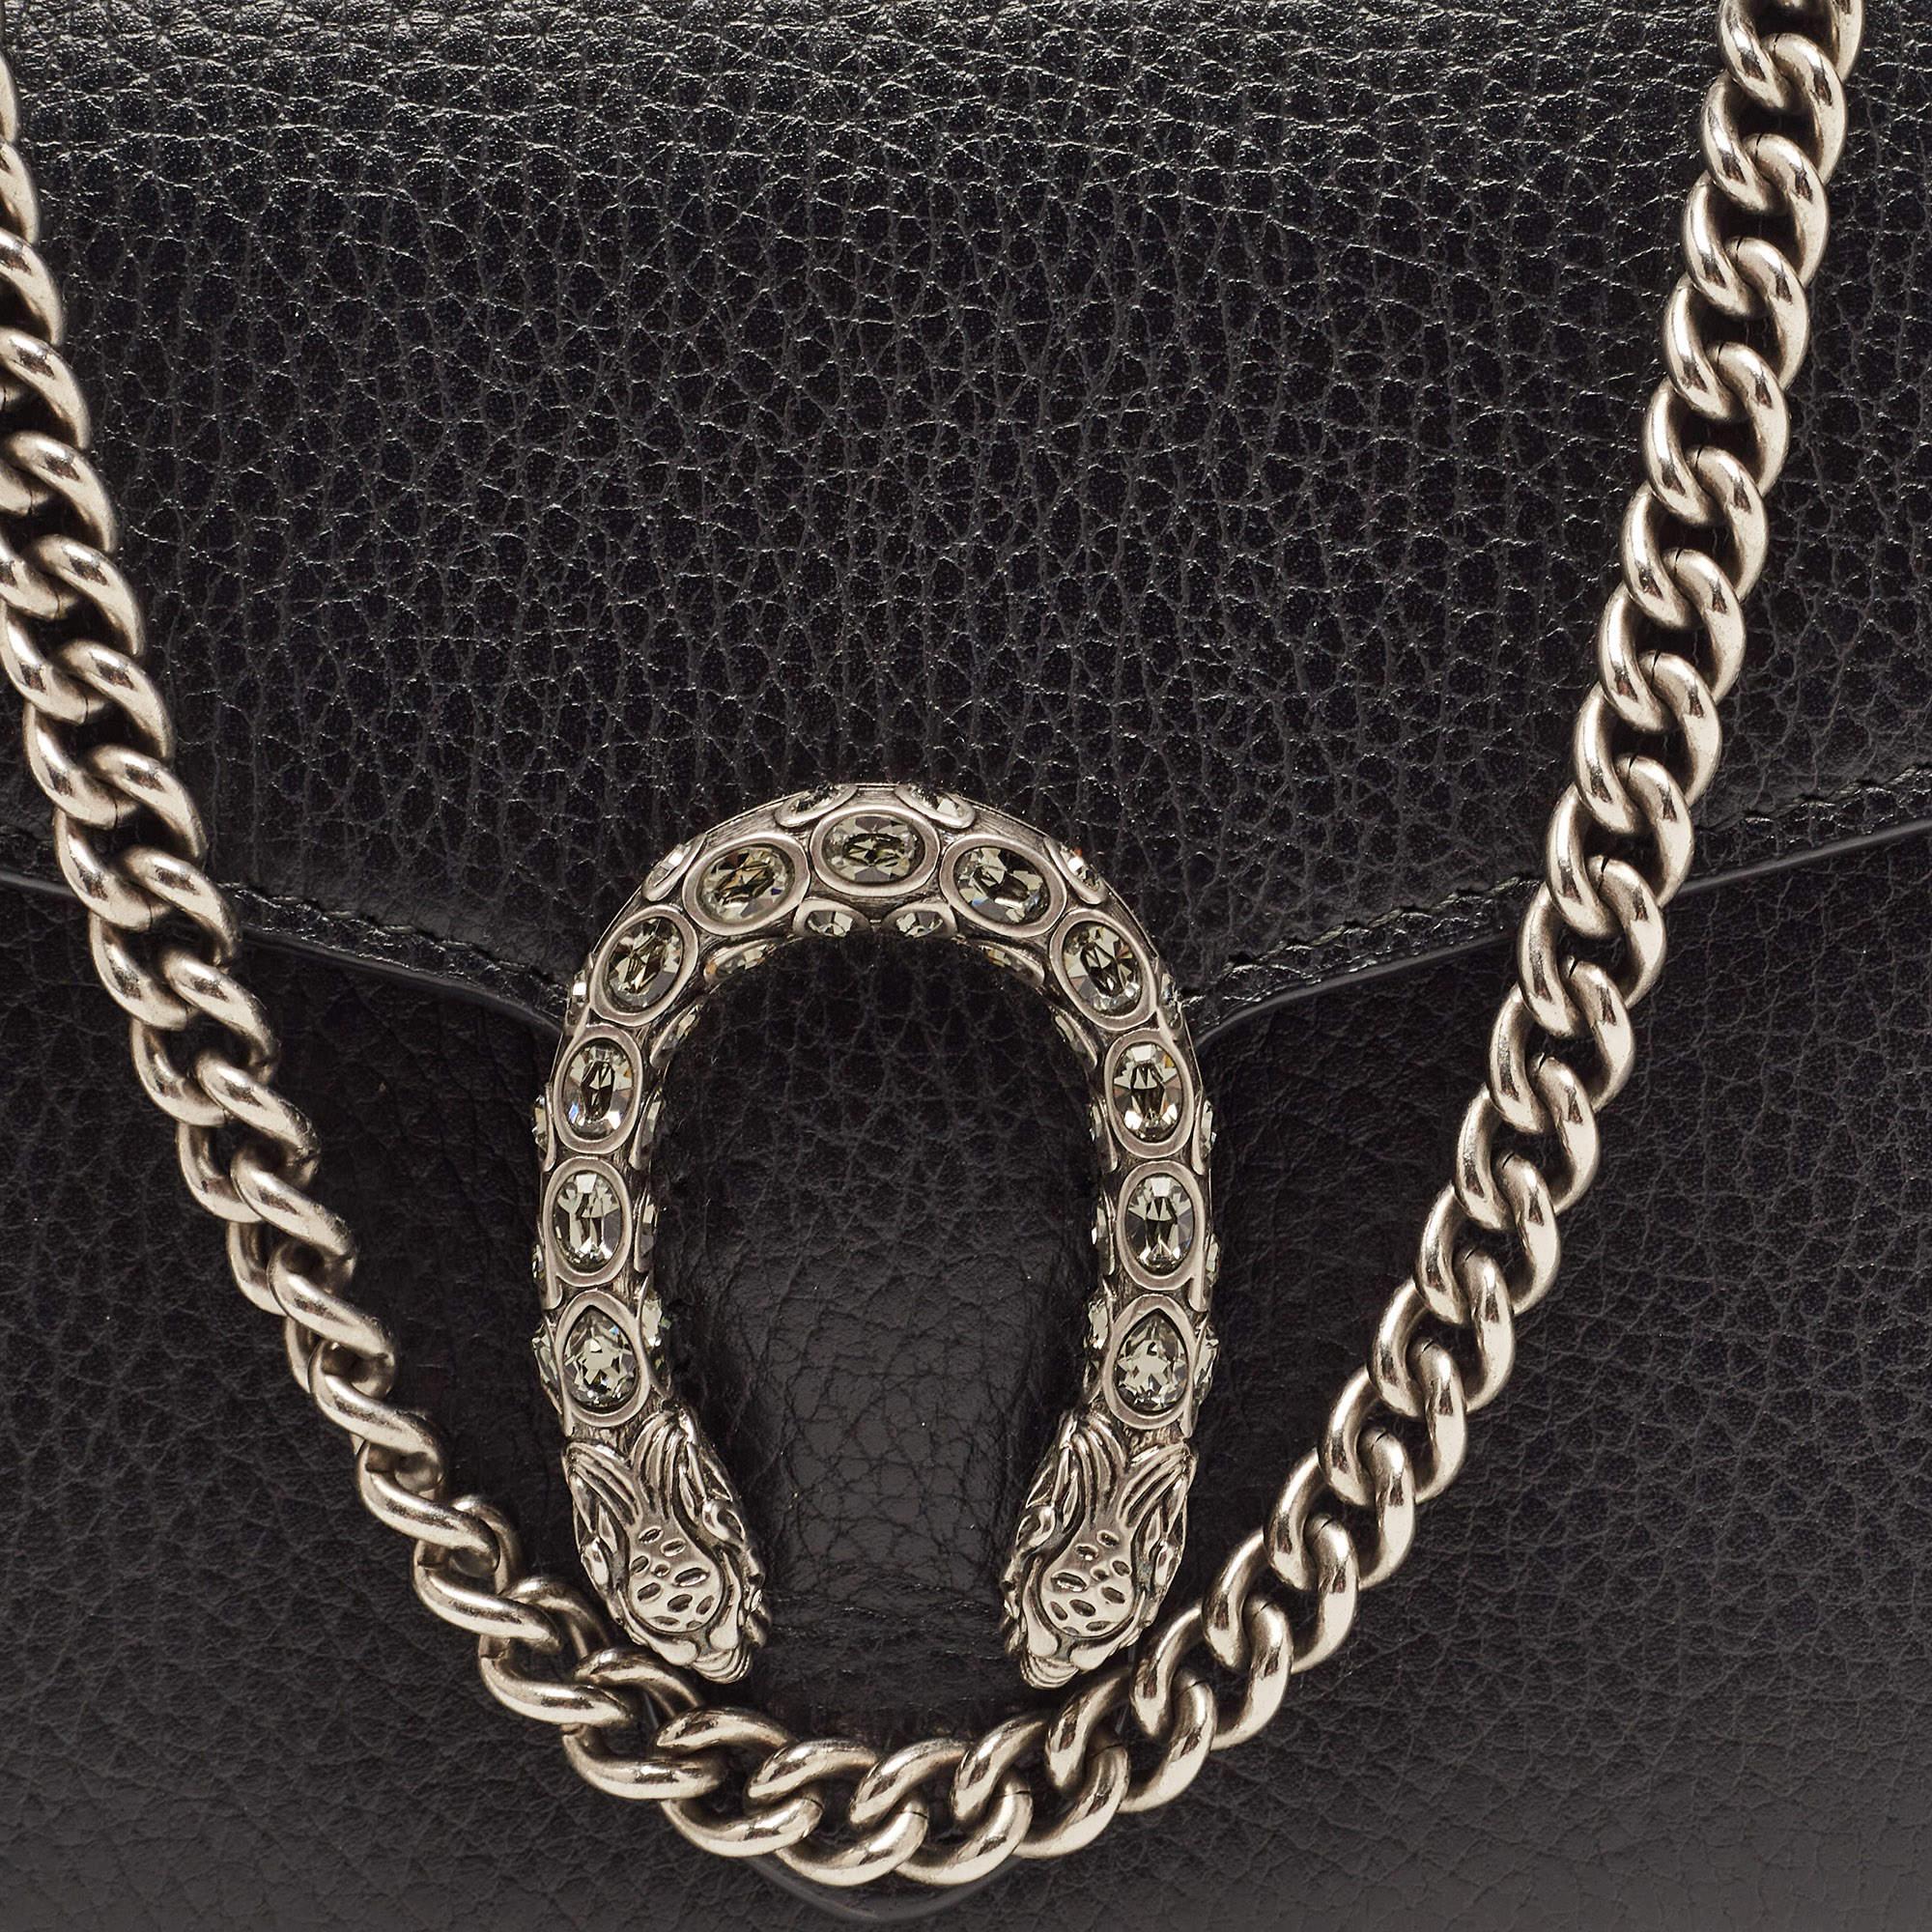 Gucci Black Leather Dionysus Crystals Wallet On Chain 3